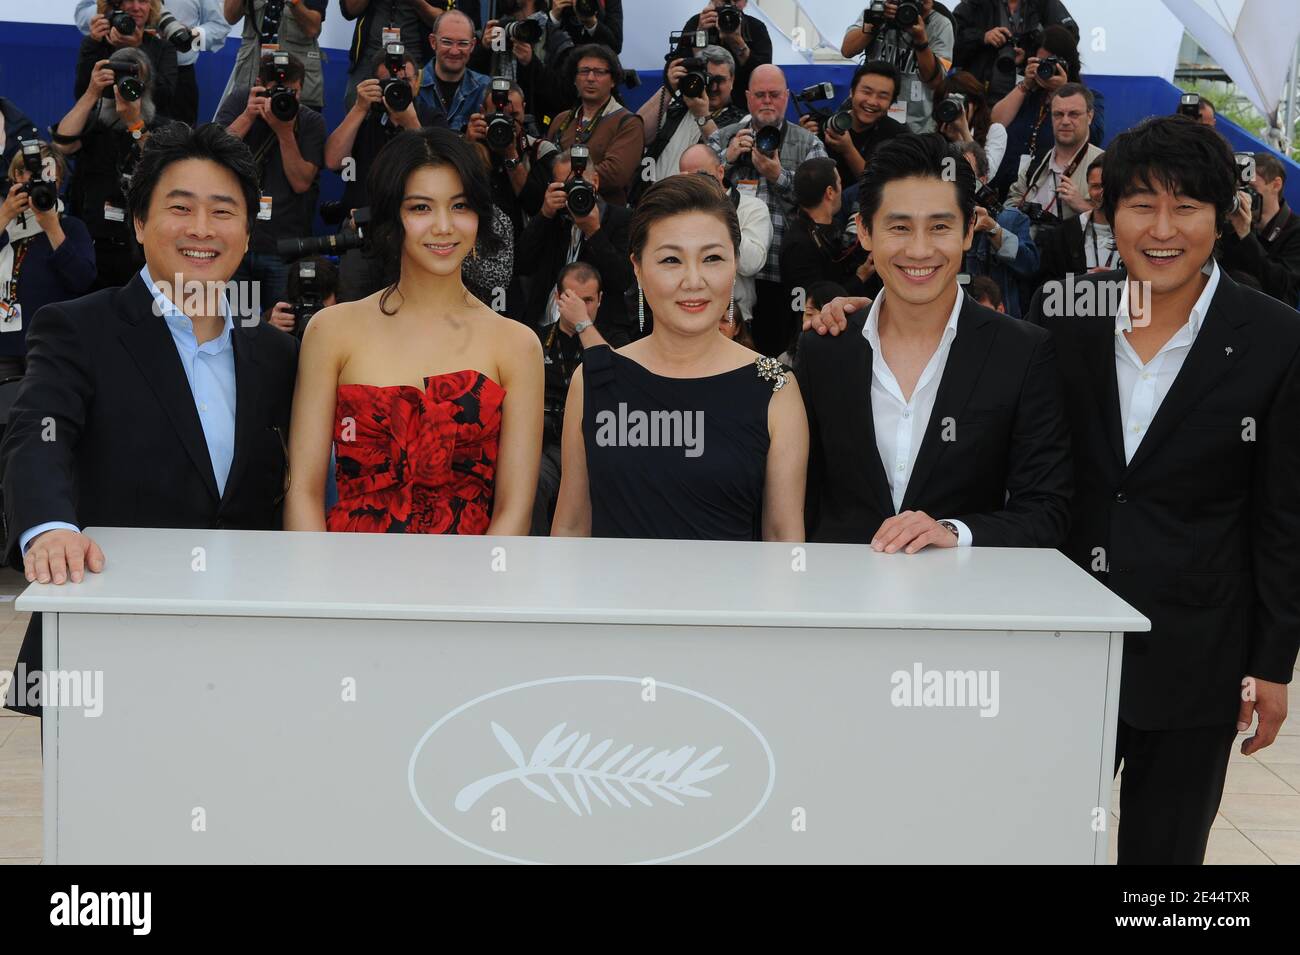 South-Korean director Chan-Wook Park , Kim Ok-Bin and Kim Hae-Sook, Shin Ha-Kyun and Song Kang-Ho attend the 'Thirst' Photocall held at the Palais Des Festivals during the 62nd International Cannes Film Festival in Cannes, France on May 15, 2009. Photo by Nebinger-Orban/ABACAPRESS.COM Stock Photo